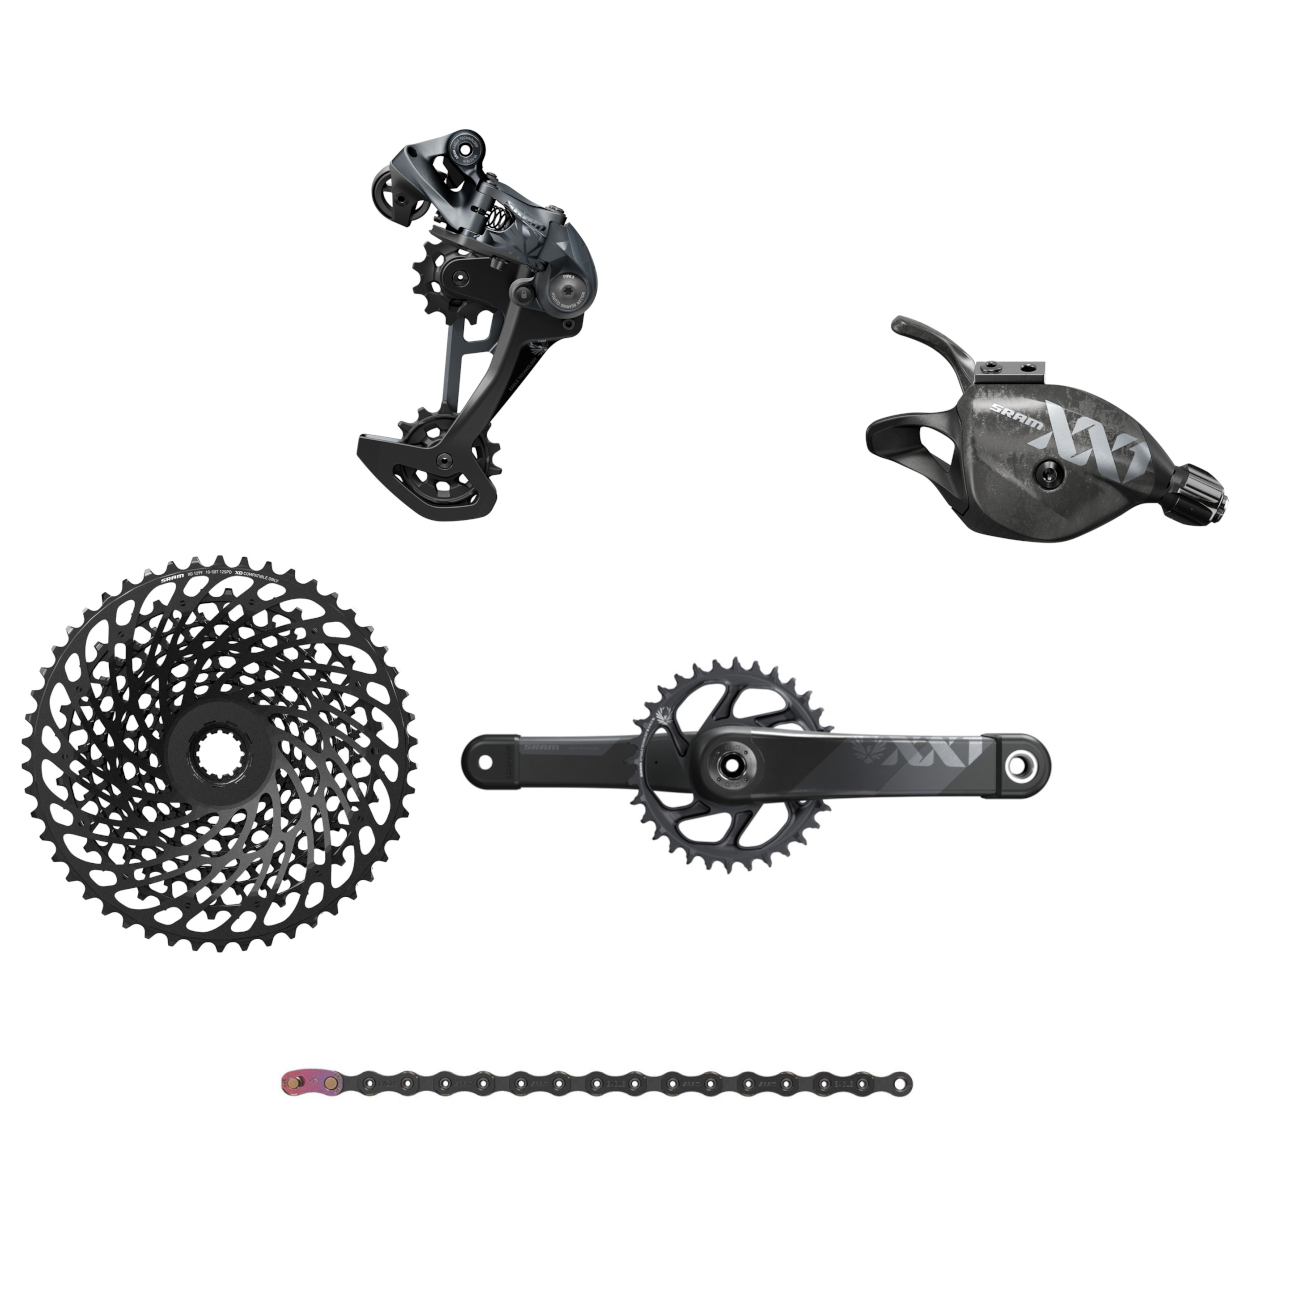 Picture of SRAM XX1 Eagle Boost Groupset - 1x12-speed - Trigger Shifter - 10-50 t. XG-1295 Cassette - black